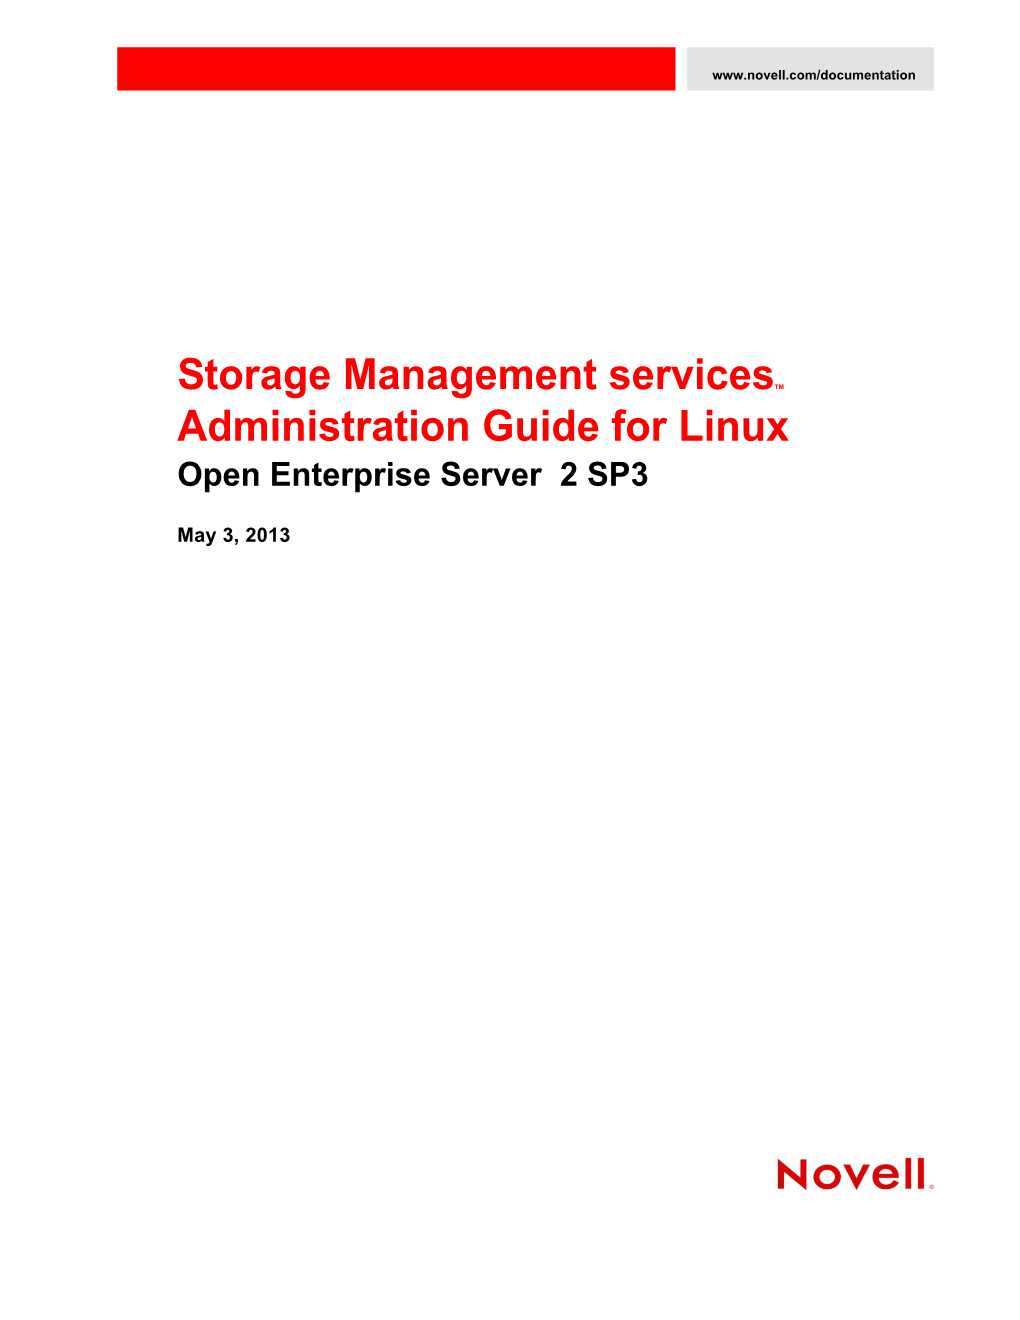 OES 2 SP3: Storage Management Services Administration Guide for Linux C POSIX File System Support 65